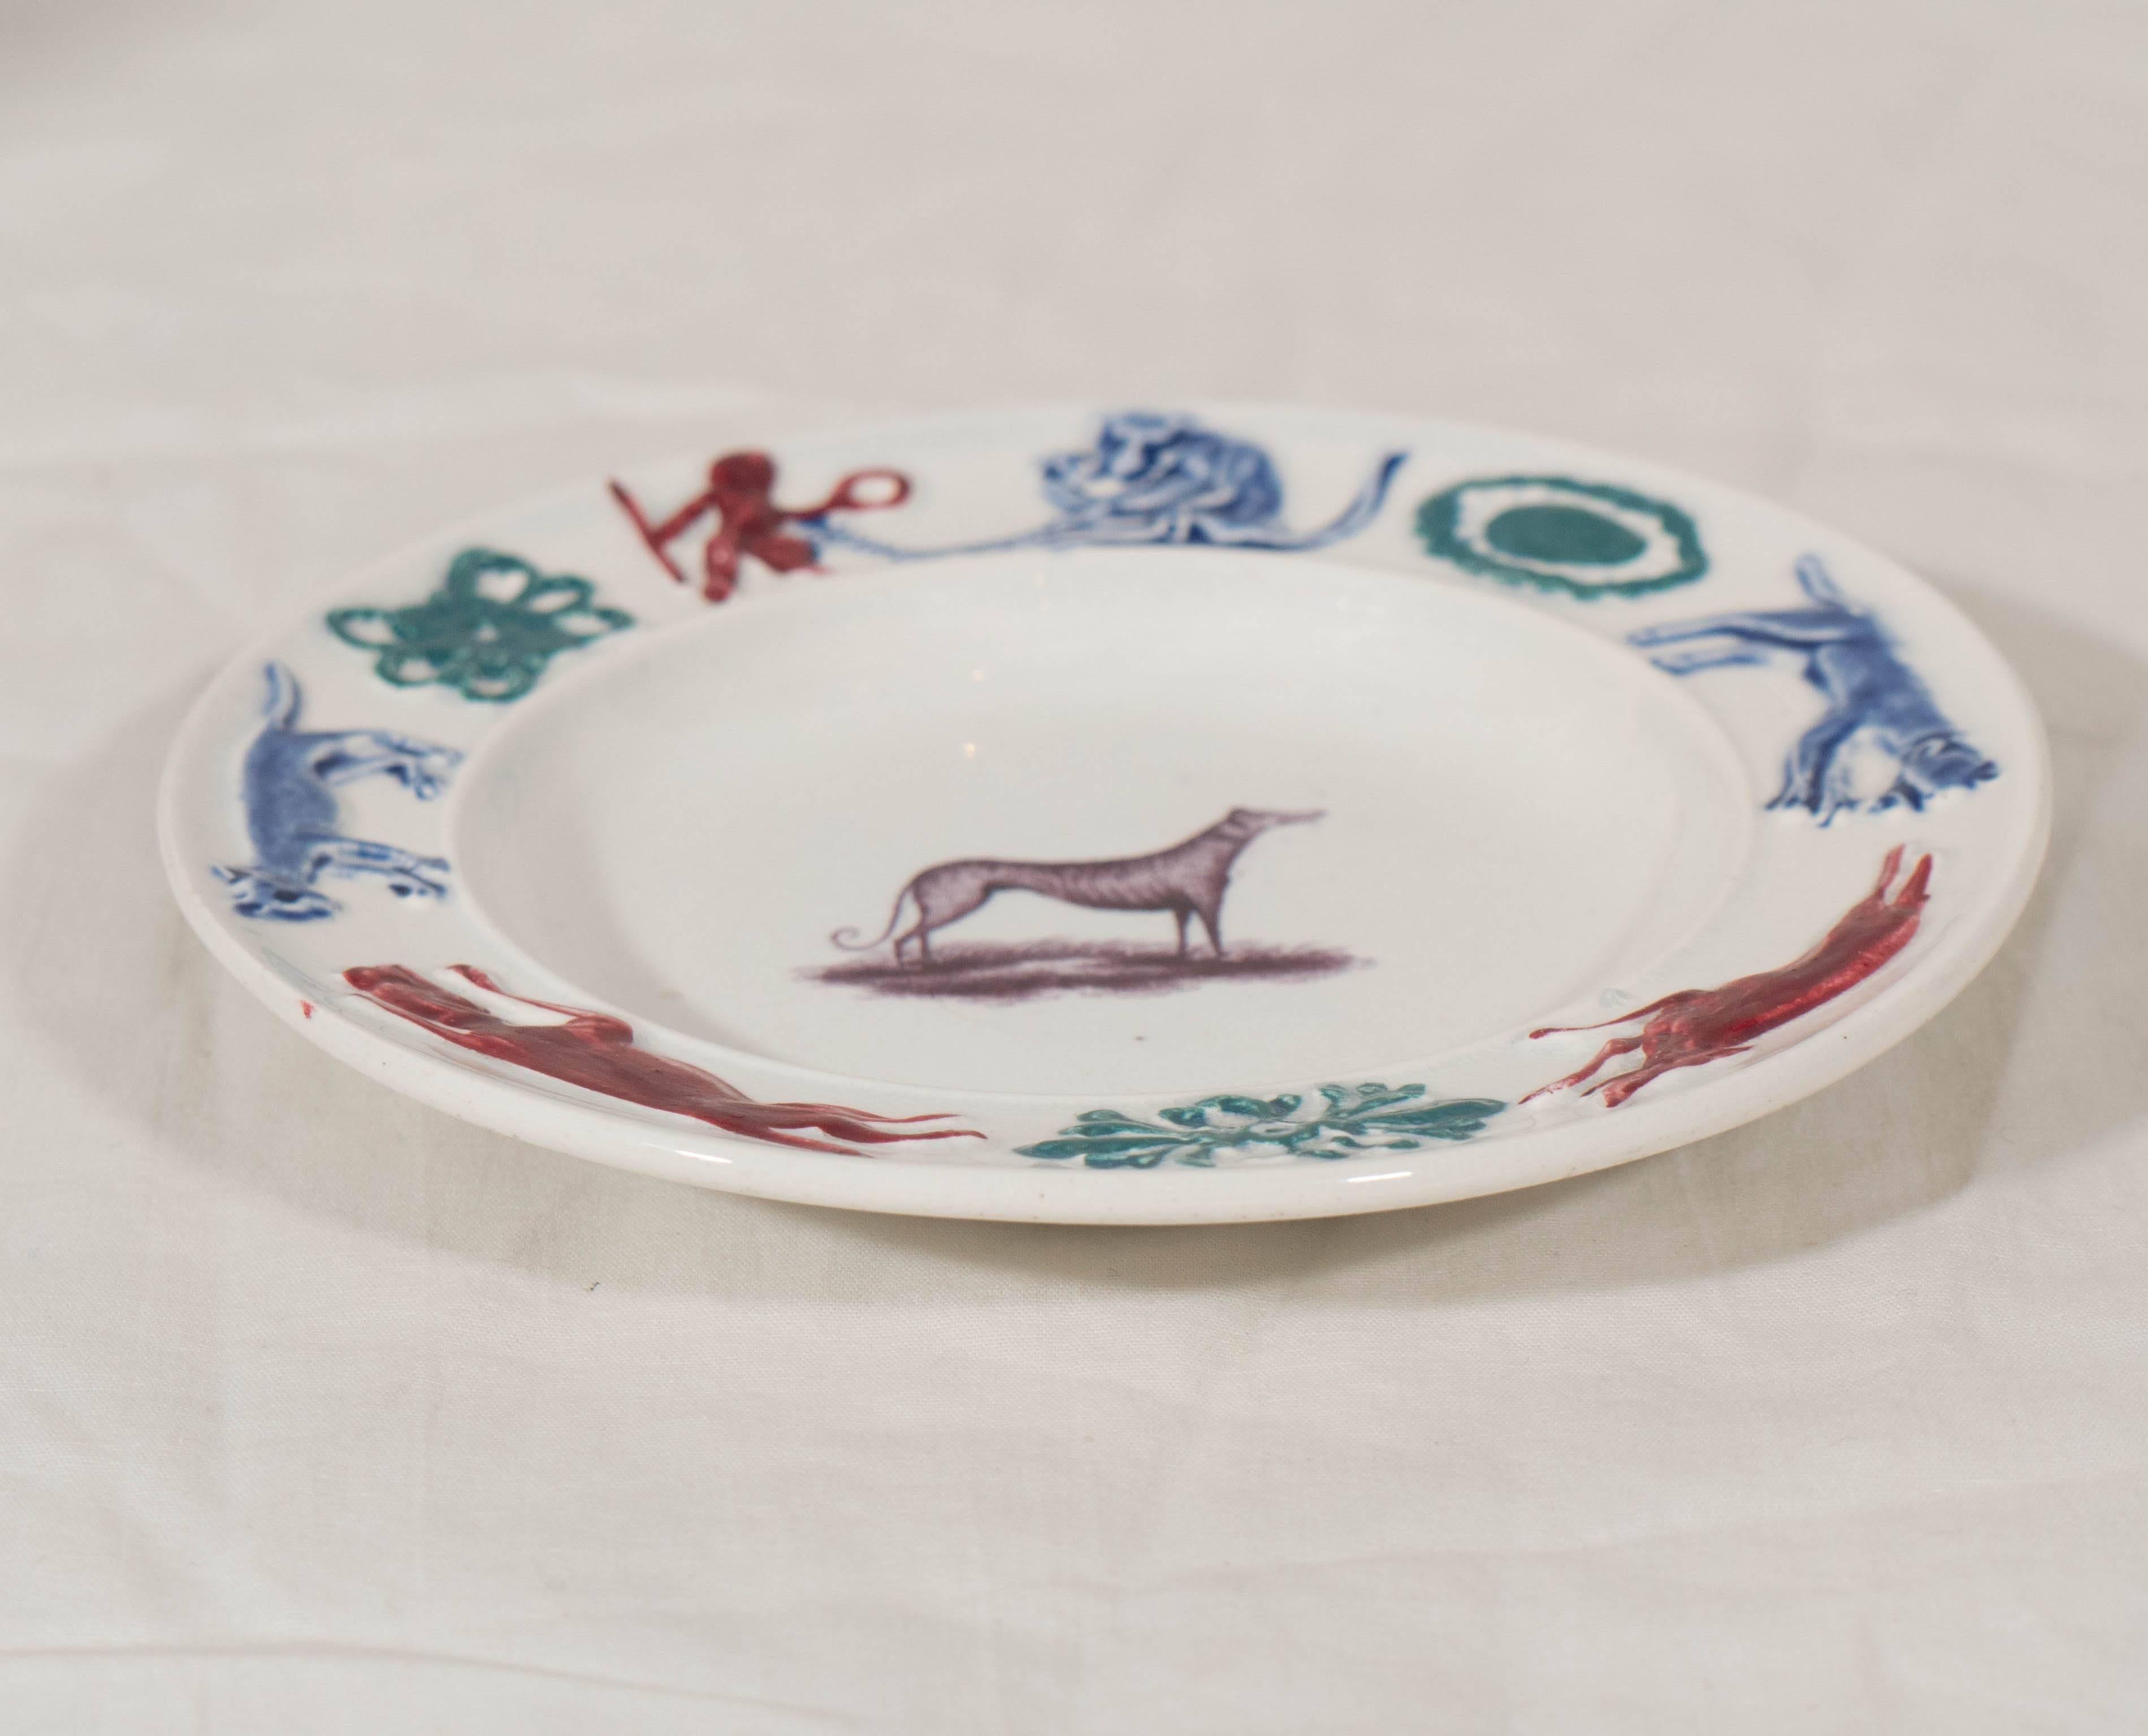 Molded  Antique Staffordshire Pottery Child's Plate Decorated with a Dog Monkey and Fox